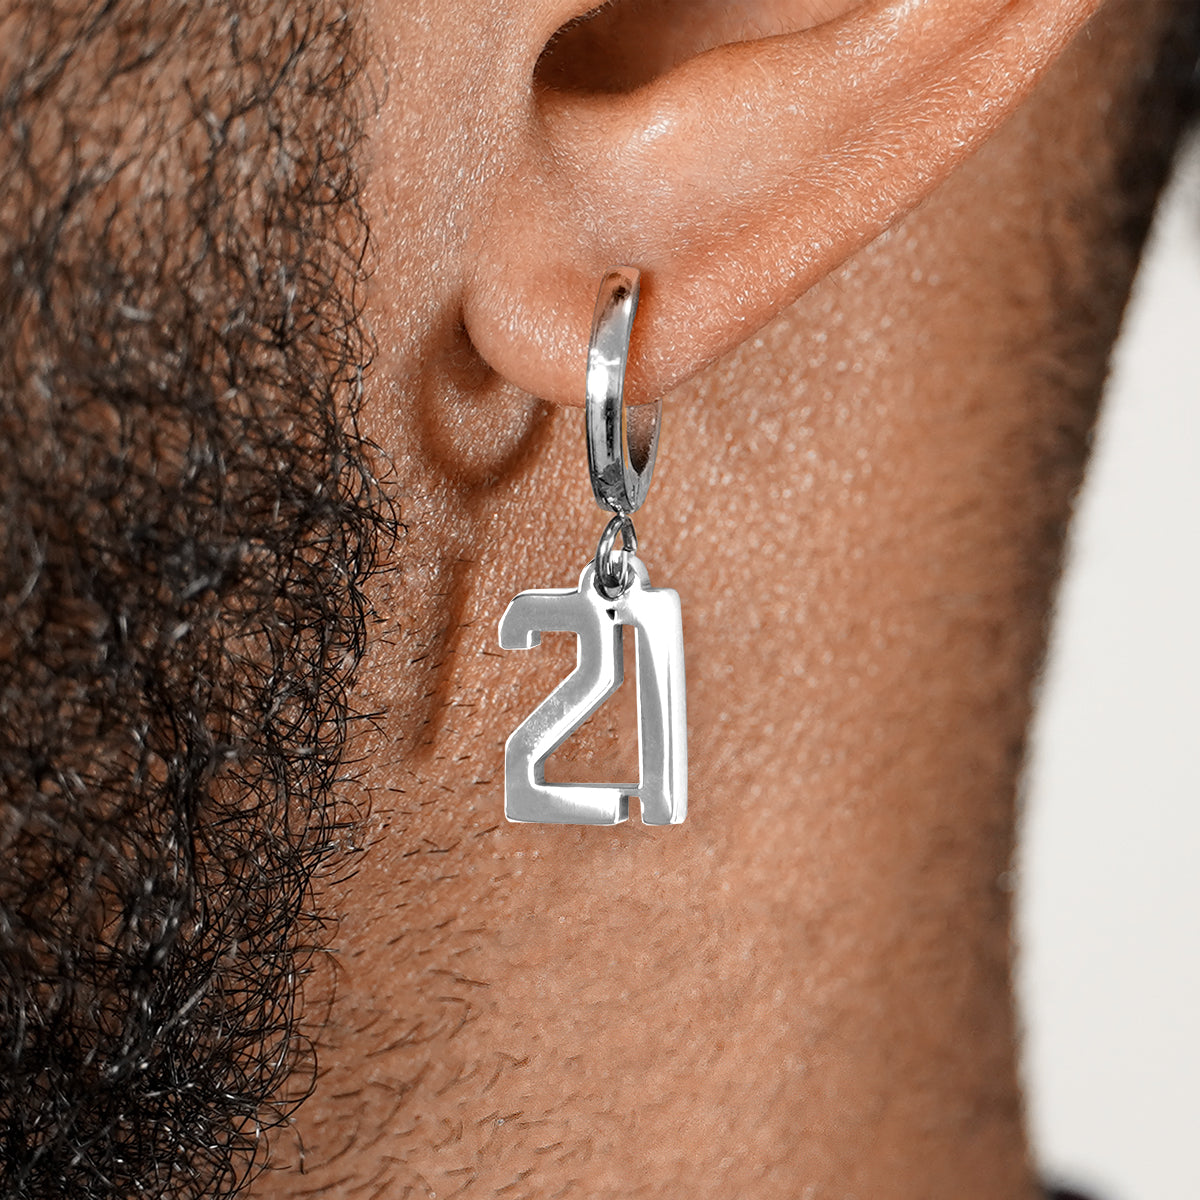 21 Number Earring - Stainless Steel